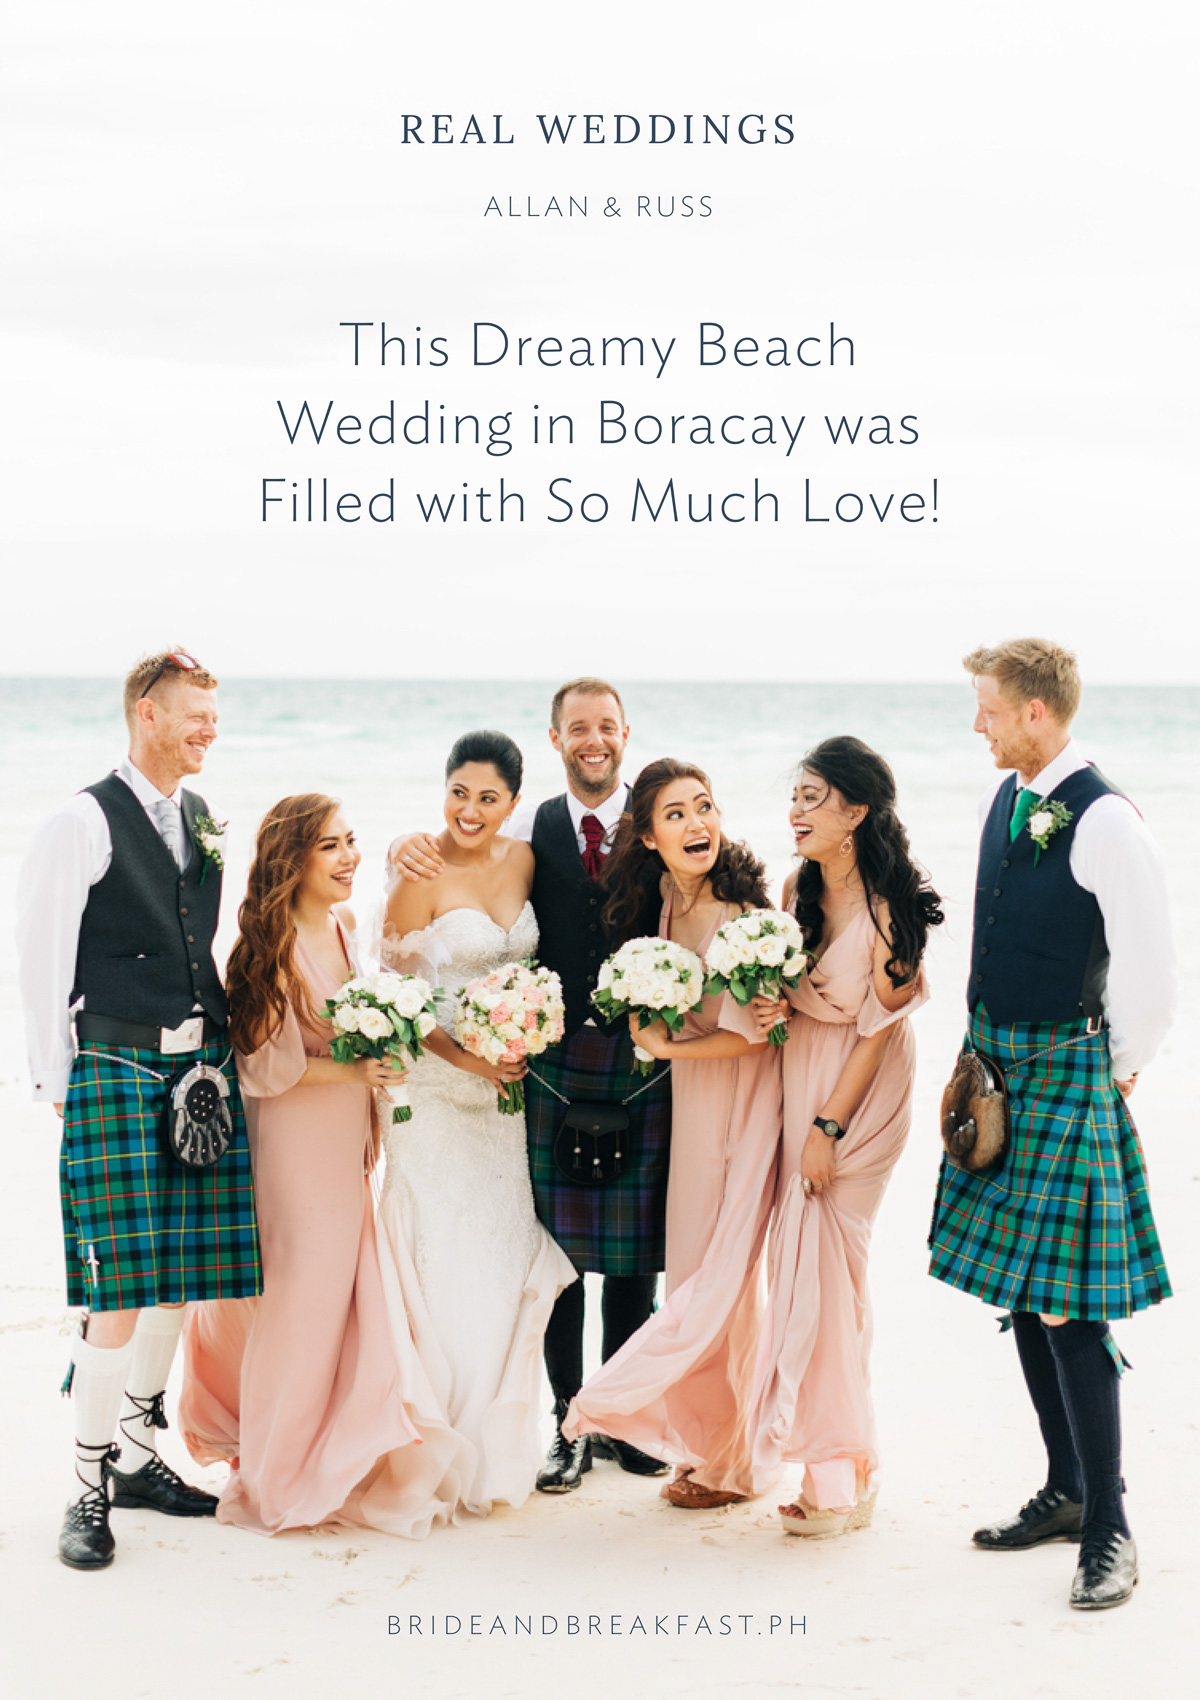 This Dreamy Beach Wedding in Boracay was Filled with So Much Love!